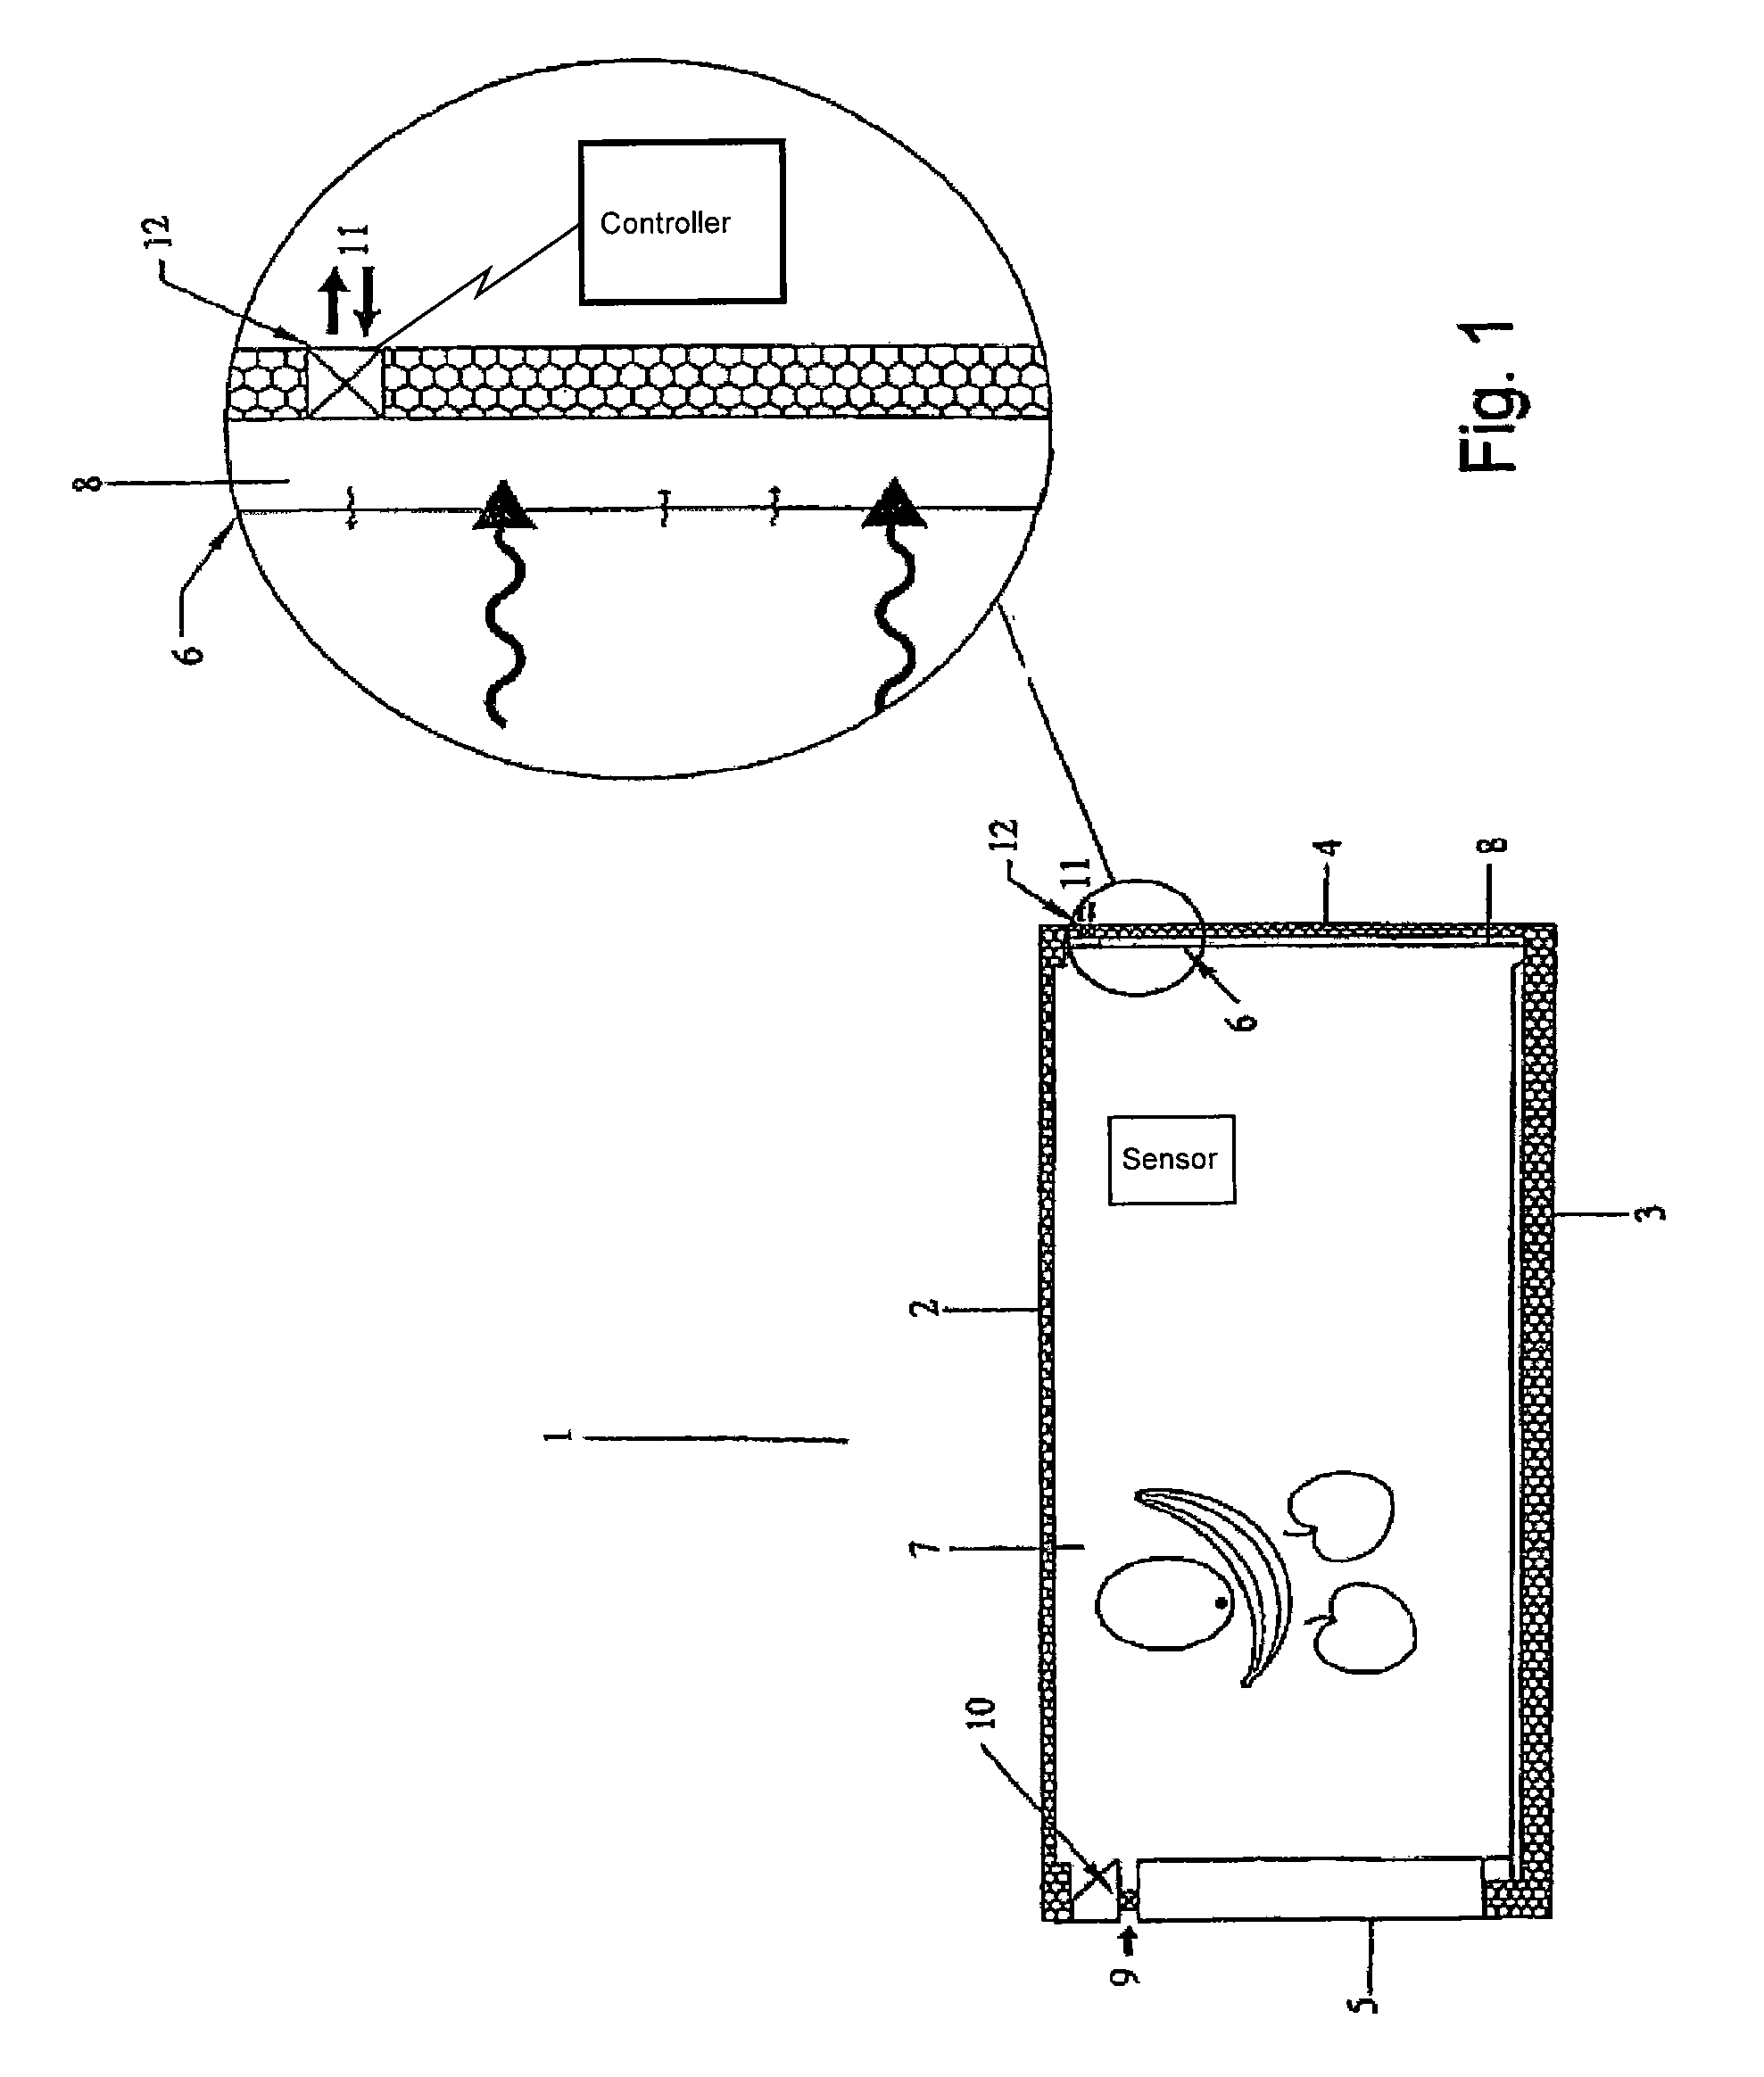 Apparatus for controlling the composition of gases within a container